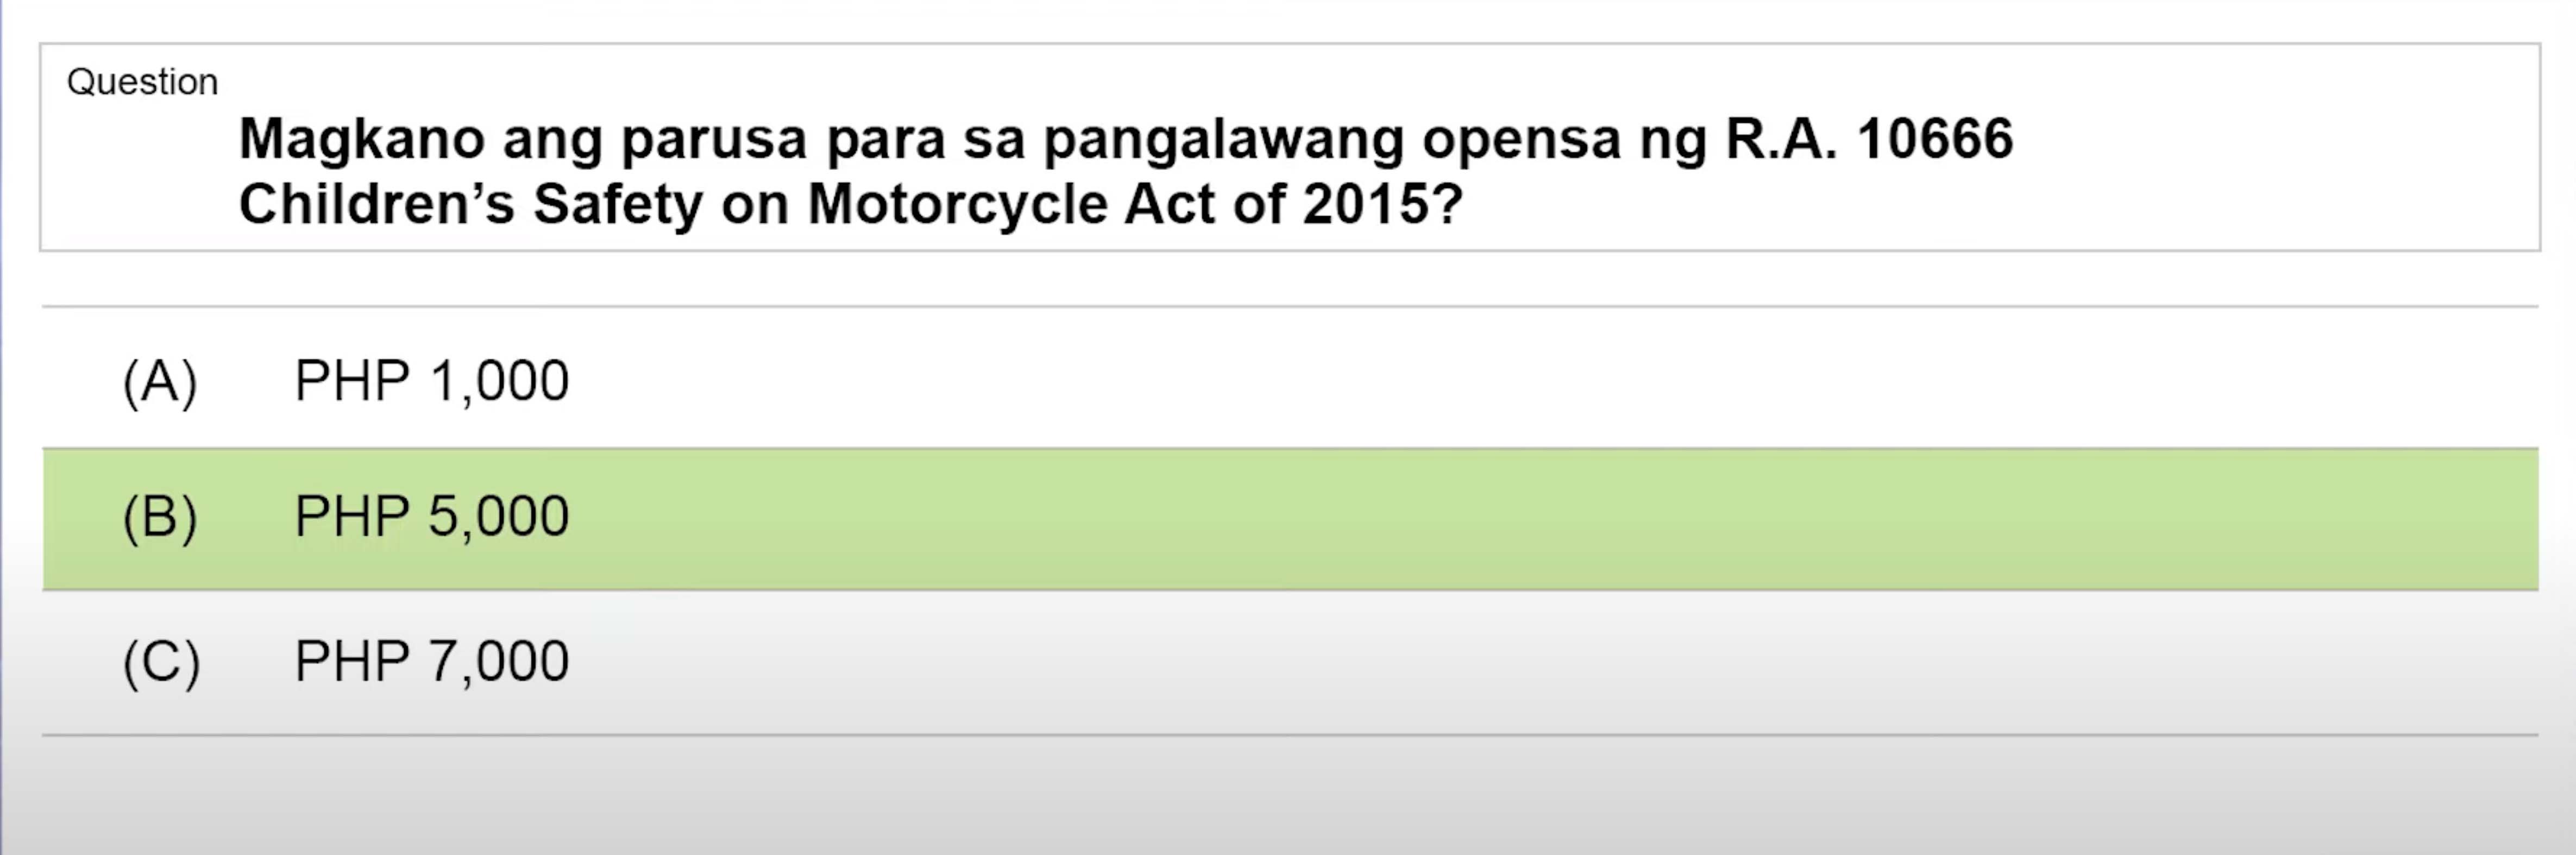 LTO Tagalog non pro exam reviewer motorcycle (30)